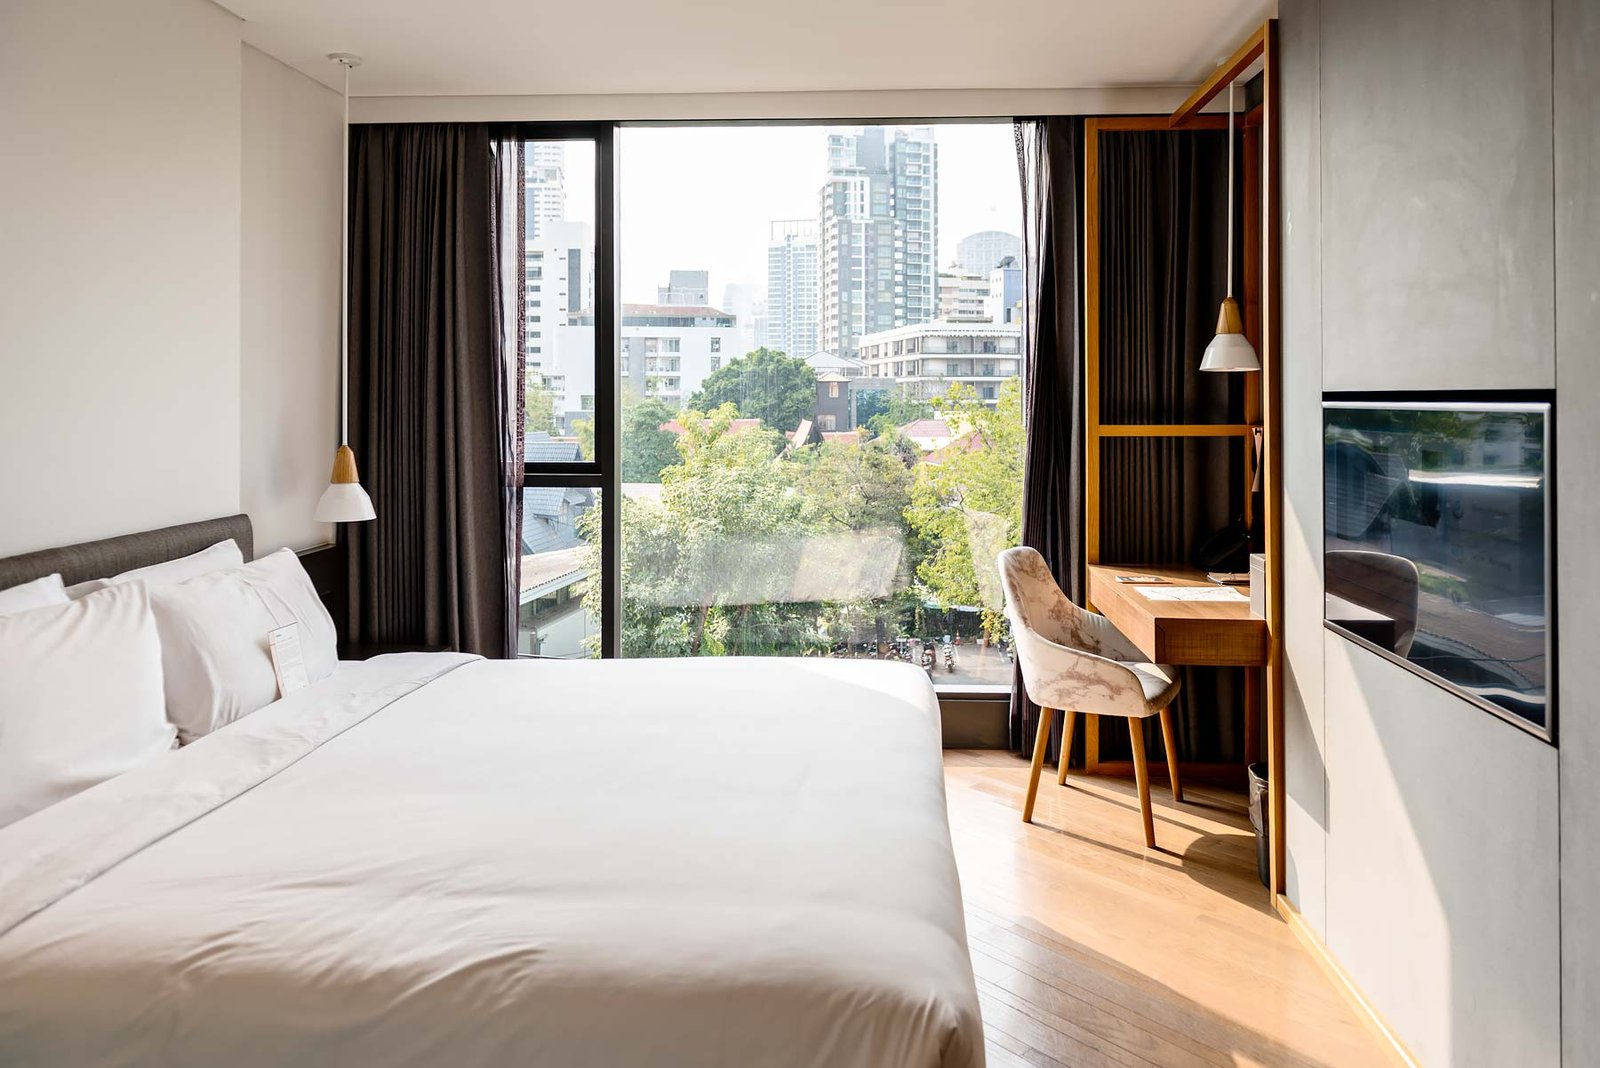 Where to Stay in Bangkok: 3 beautiful boutique hotels